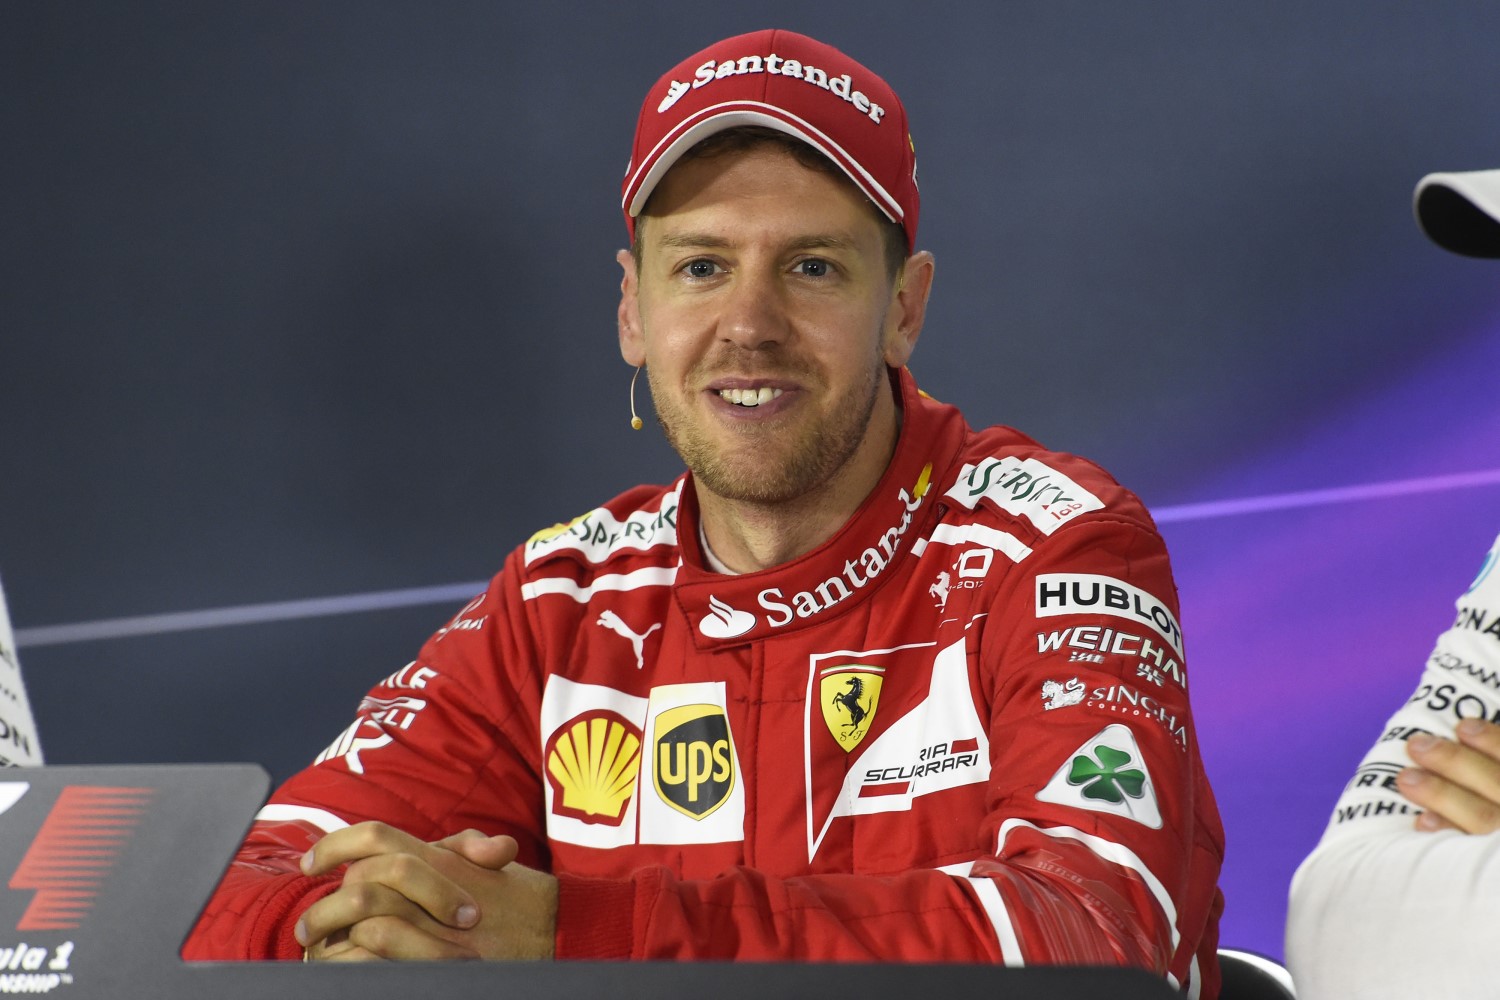 It's too early to predict whether Vettel will stay at Ferrari